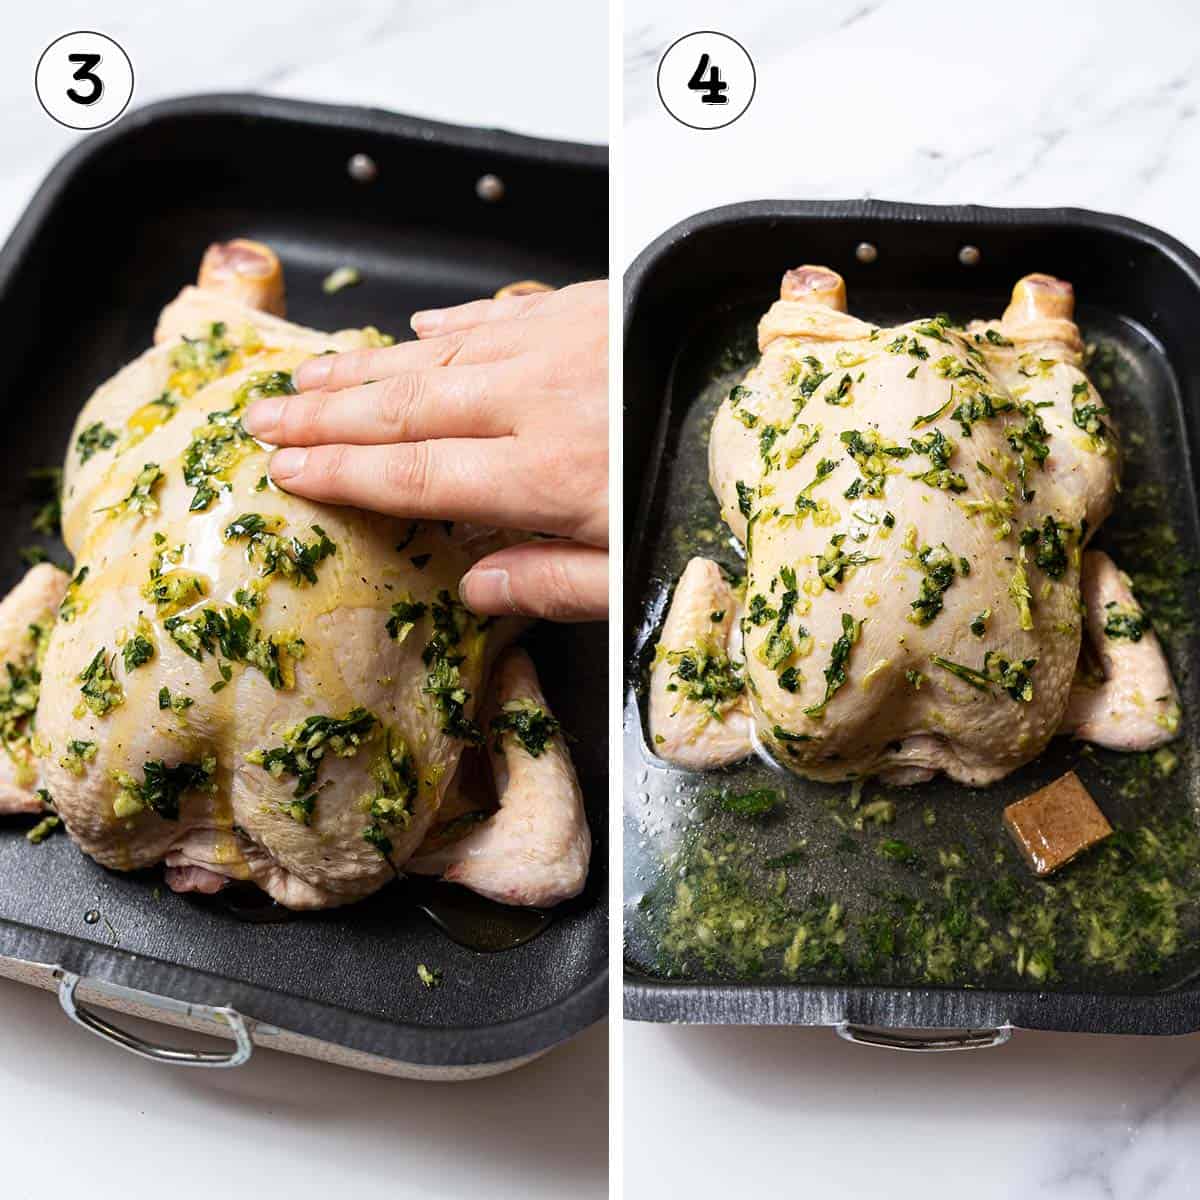 rubbing the chicken with the paste and olive oil and putting in the roasting pan.